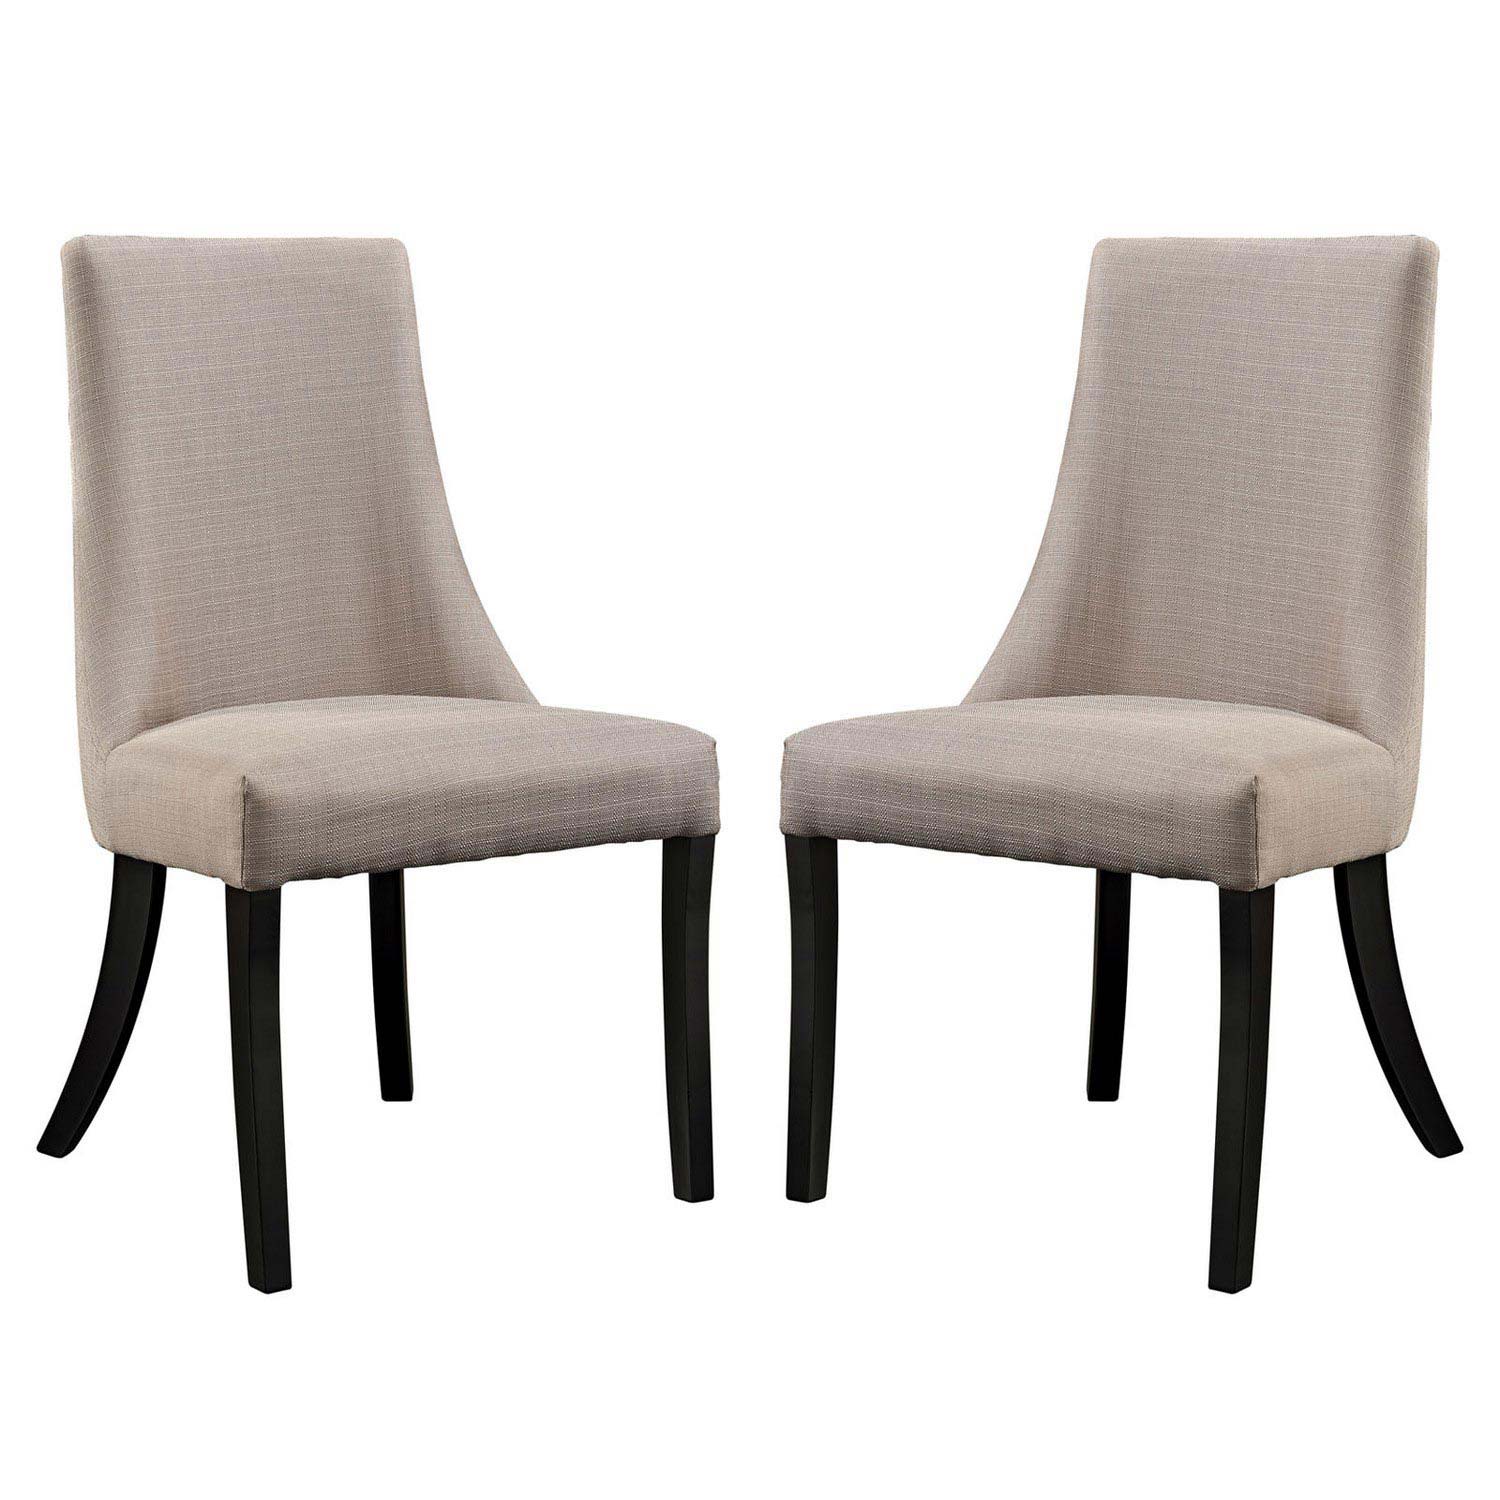 Modway Reverie Dining Side Chair Set of 2 - Beige